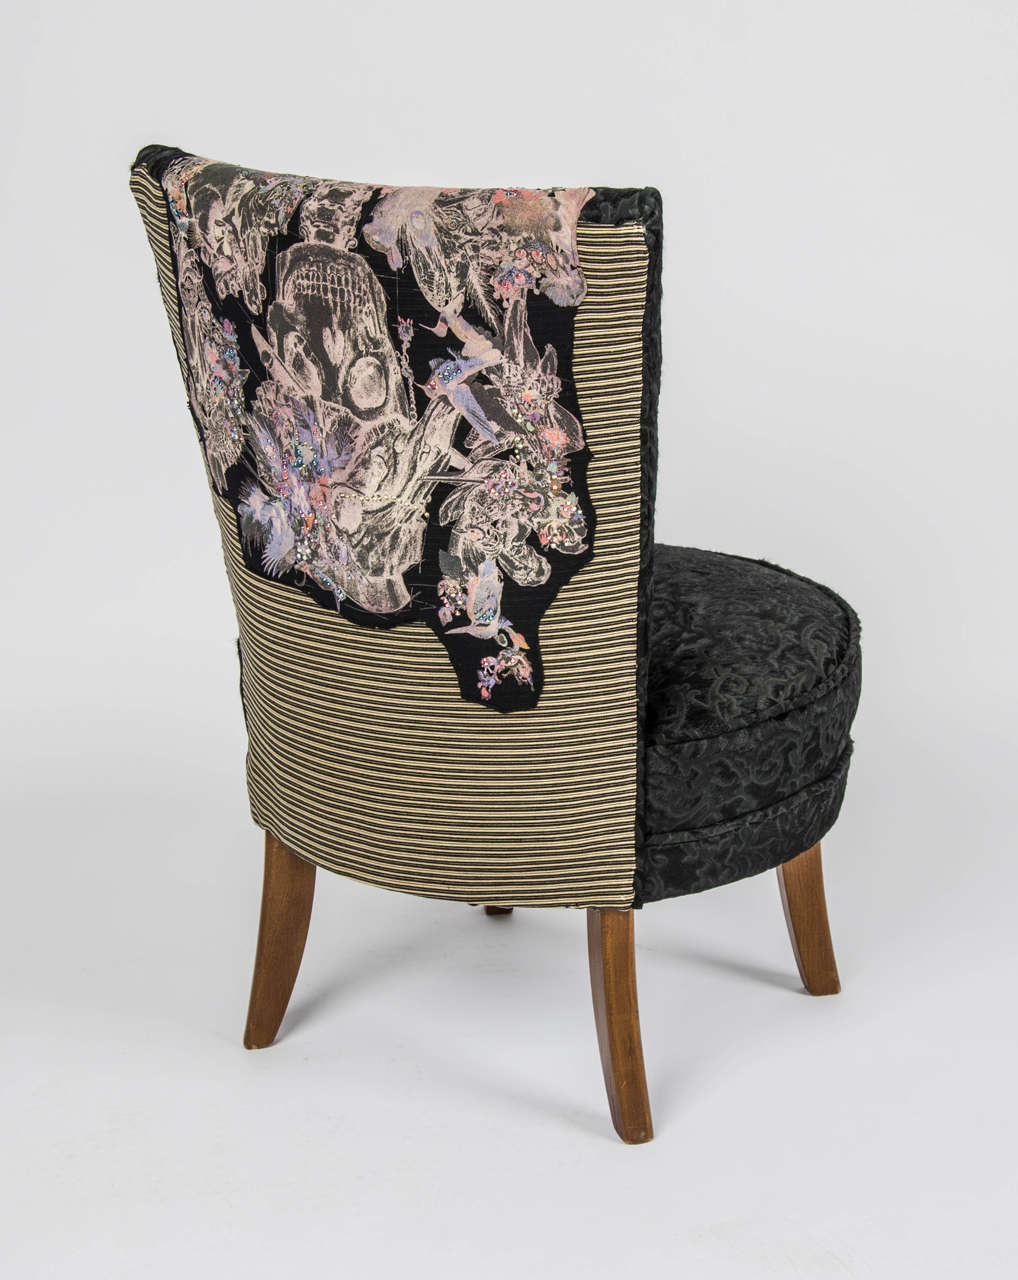 French Unique Rock & Roll Style Small Black 'Boudoir' Chair 1946